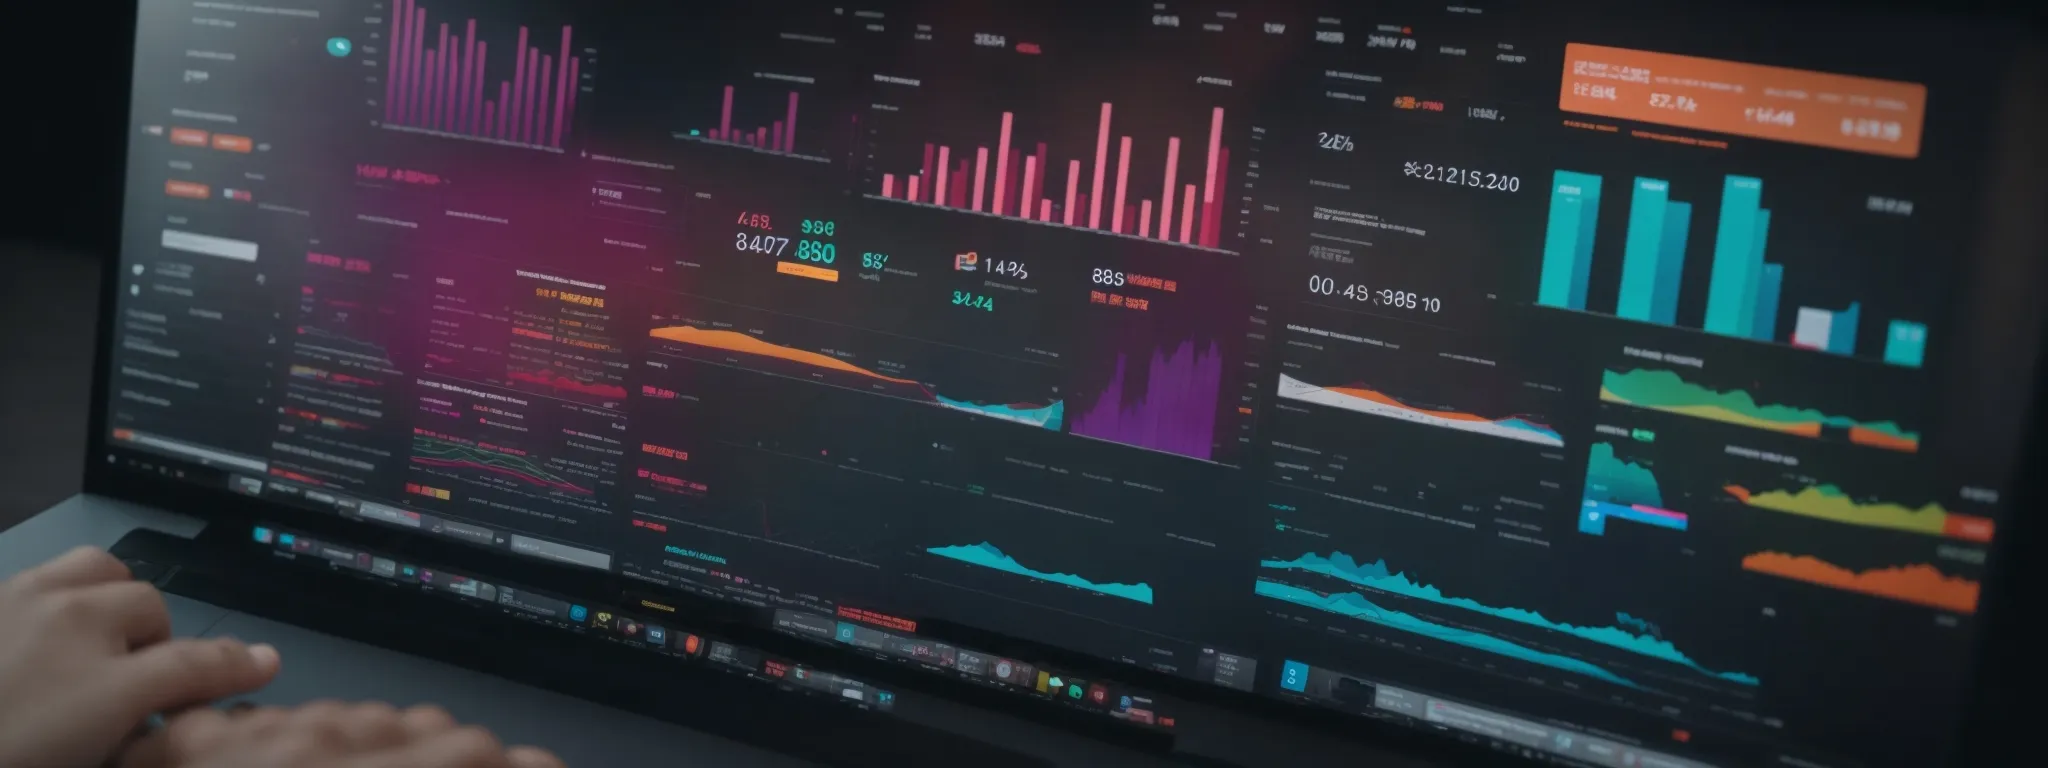 a digital marketer analyzes a colorful semrush dashboard showcasing a variety of keyword trends and metrics on a computer screen.